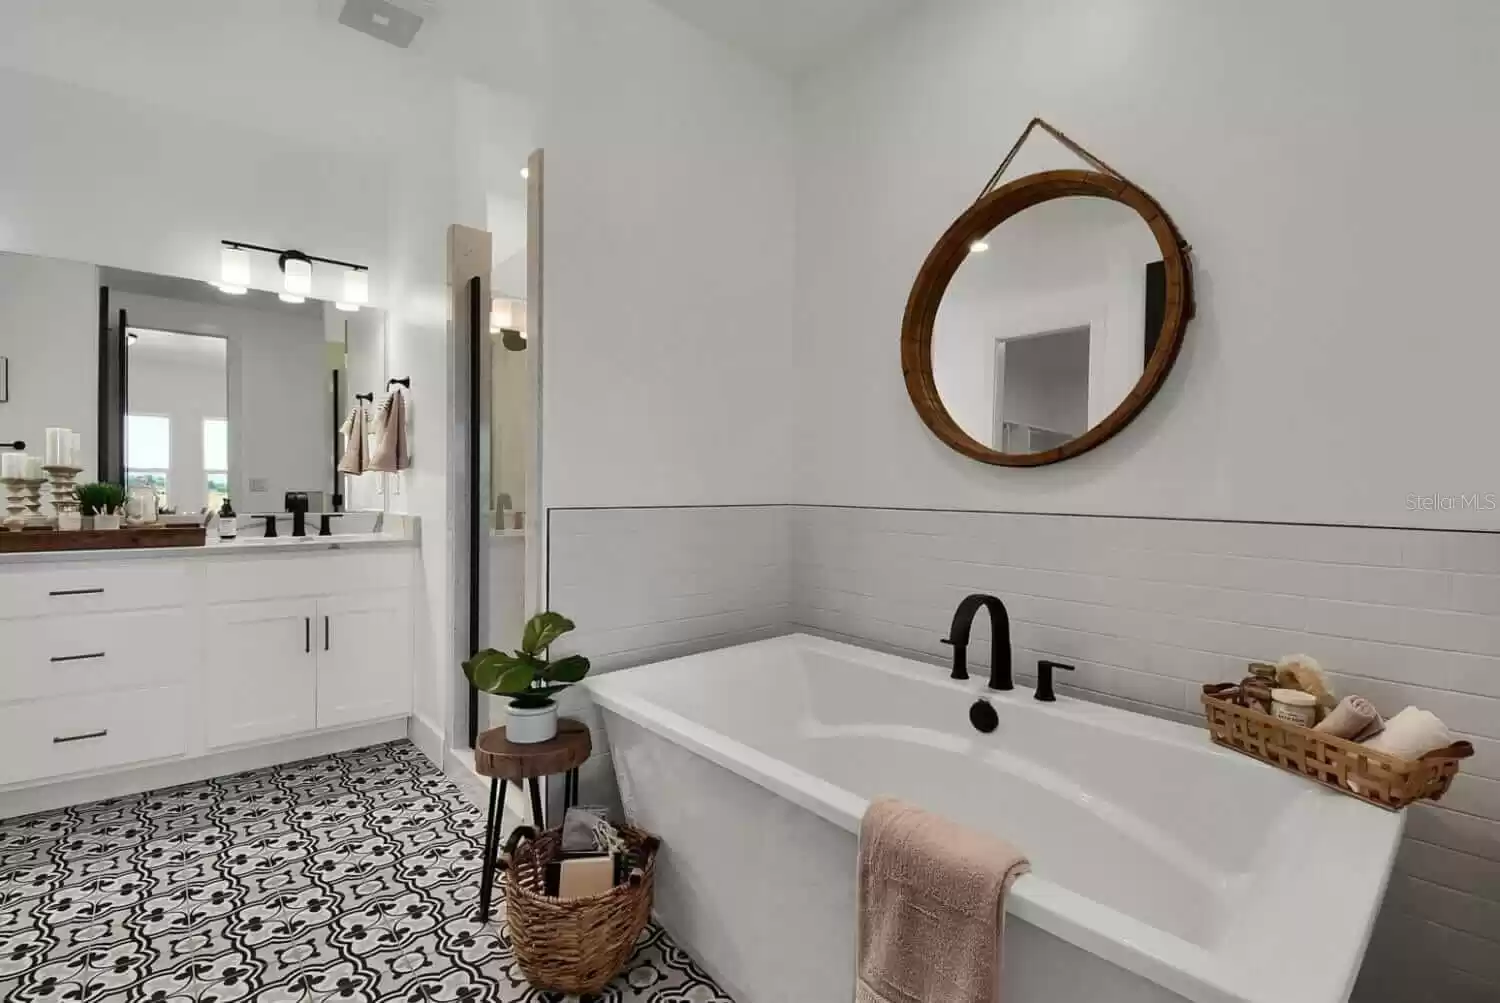 Master Bathroom.  Accessories shown are not included. Counter Tops, Flooring, Sinks, Tub, Mirrors, Fixtures and Shower Door may vary. All such details to be discussed and concluded at the Bulder Meeting.